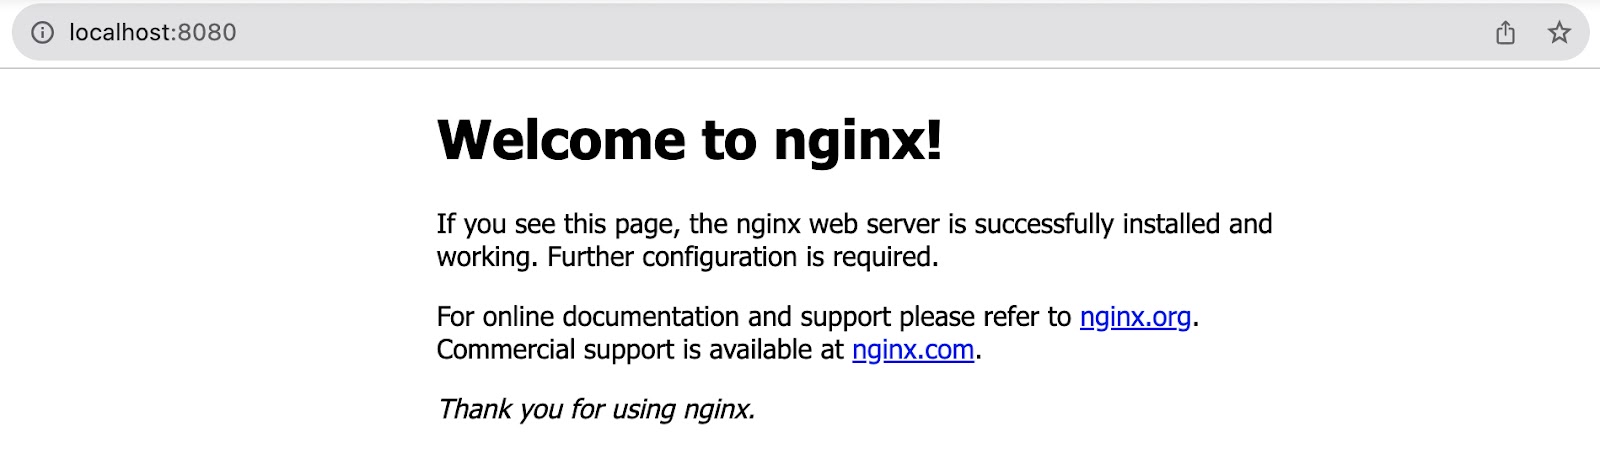 Default nginx home page